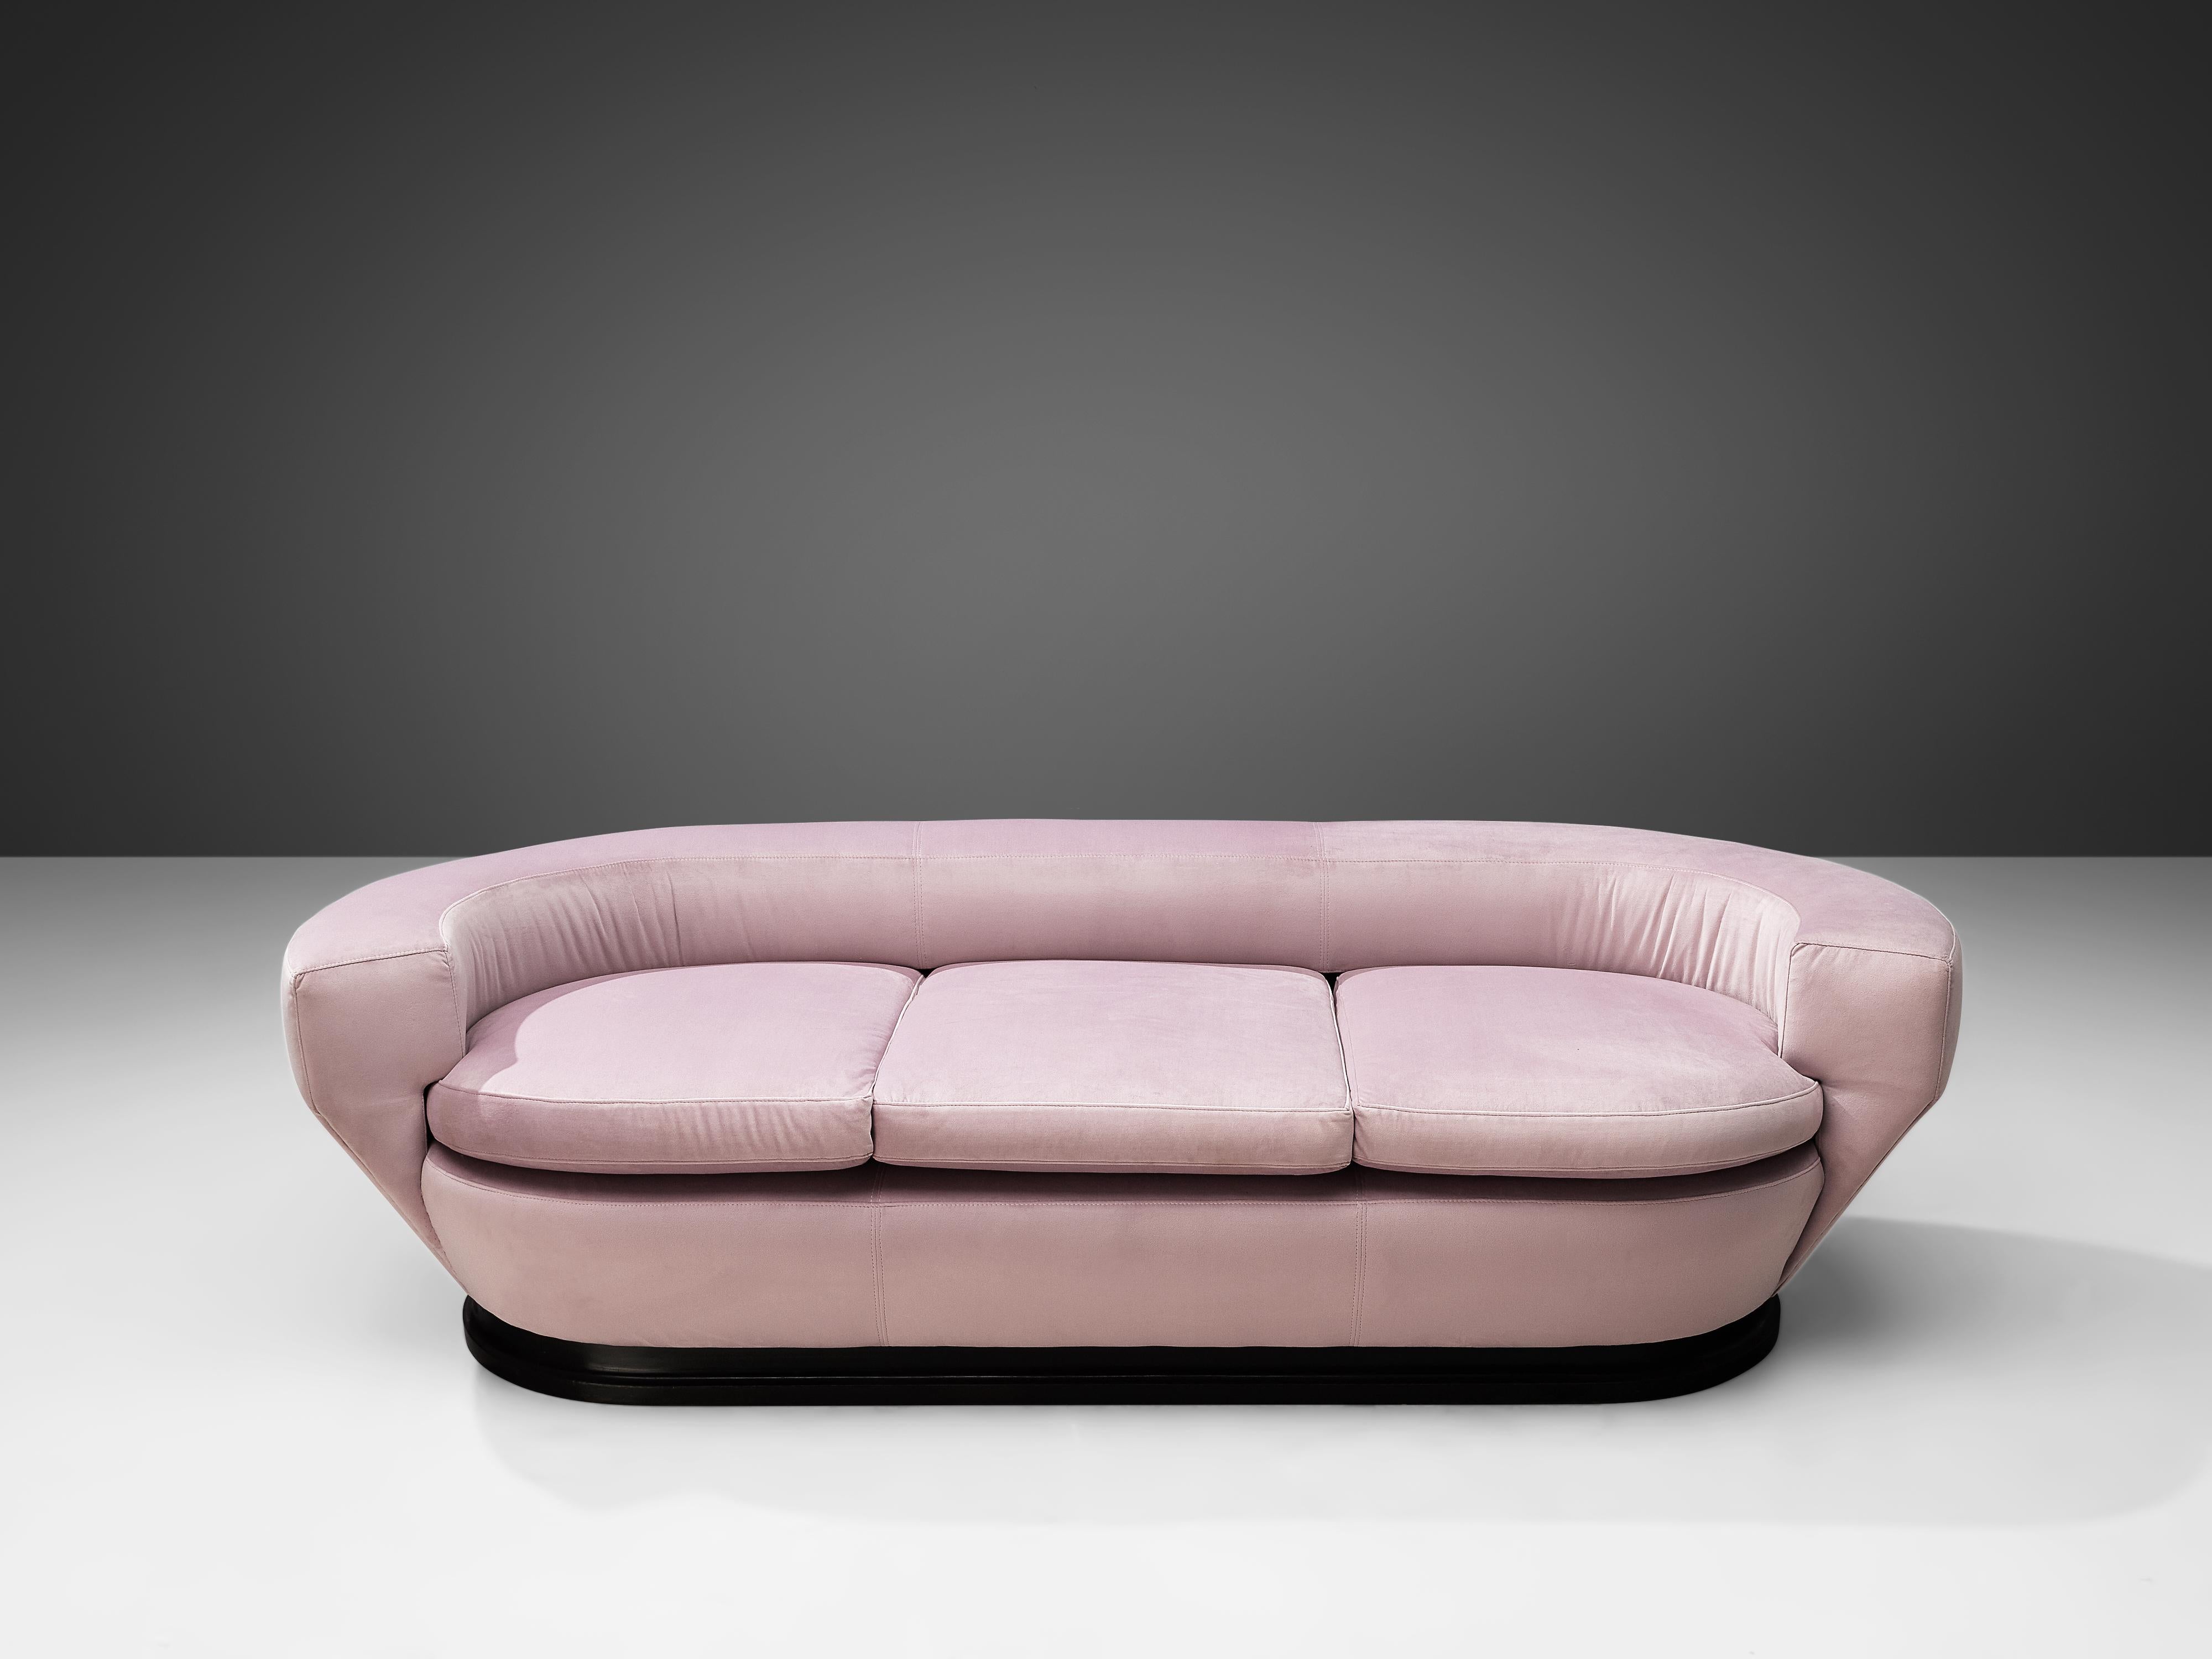 Three-seat sofa, ultrasuede, darkened wood, Italy, 1960s

This beautifully shaped sofa features a well-proportioned construction of round shapes and fluent lines. The backrest functions as a shell that embraces the sitter wonderfully and merges